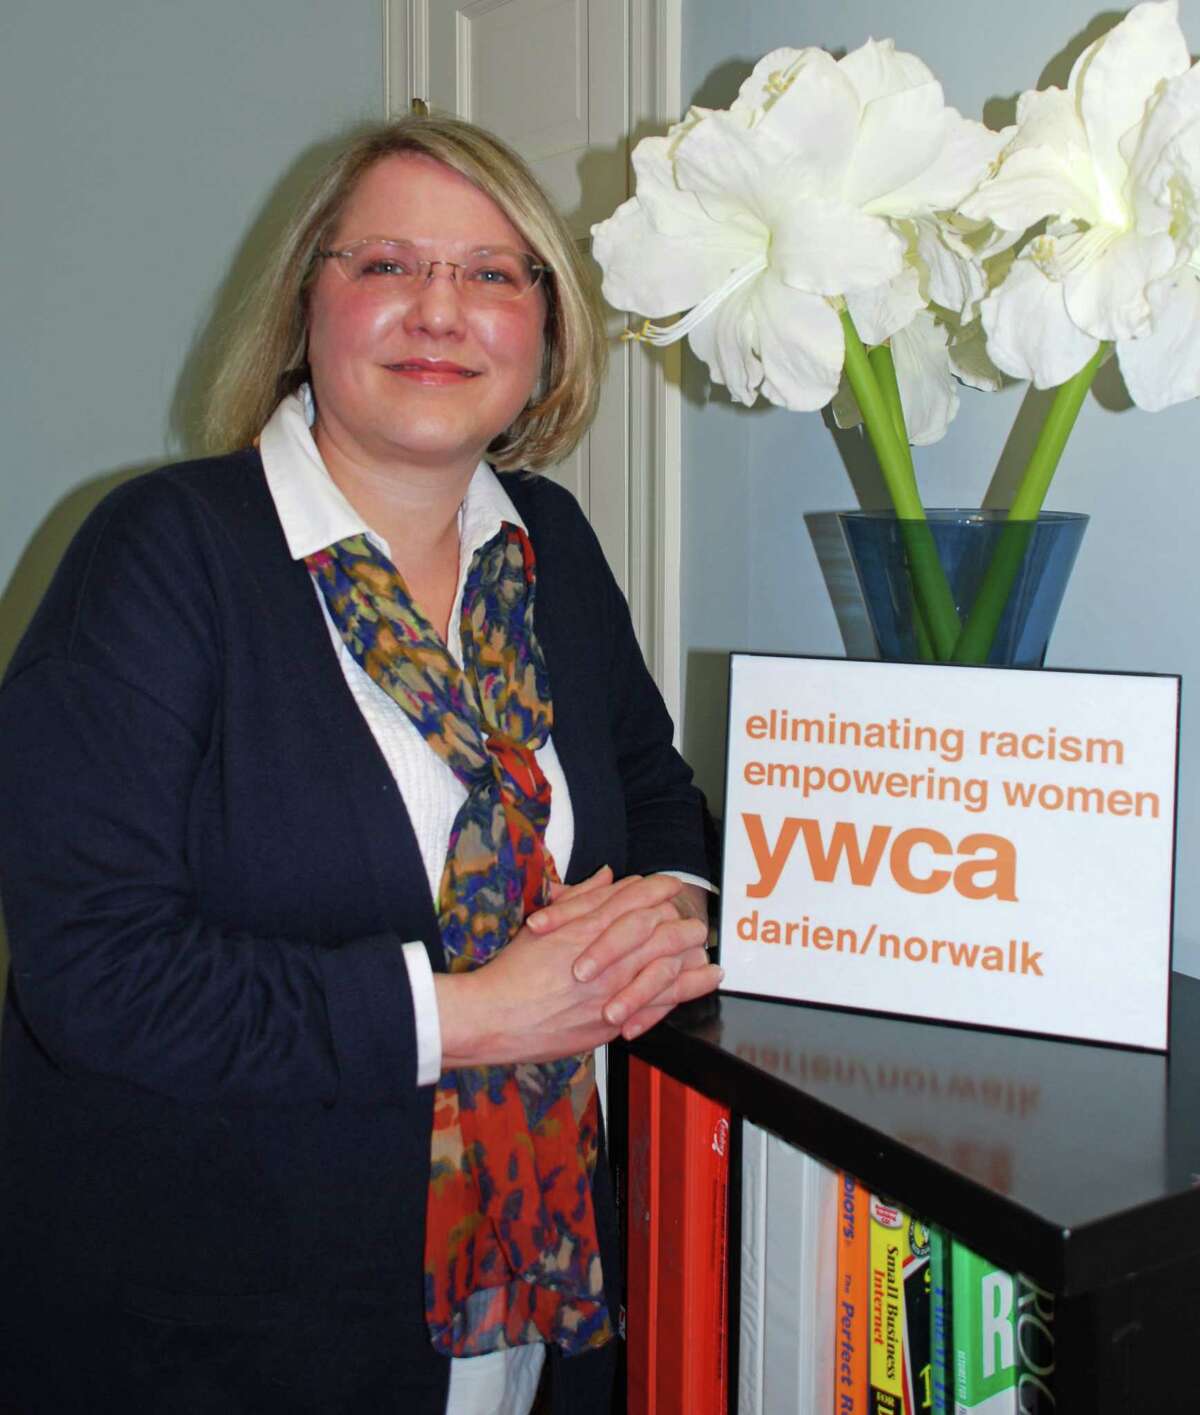 In 2015, the YWCA Darien/Norwalk recognized Stepping Stones Museum for Children CEO Rhonda Kiest with its annual Women of Distinction award. In June 2016, Stepping Stones was sued by a former manager who claims Kiest did not address another manager’s alleged racial discrimination against the plaintiff.